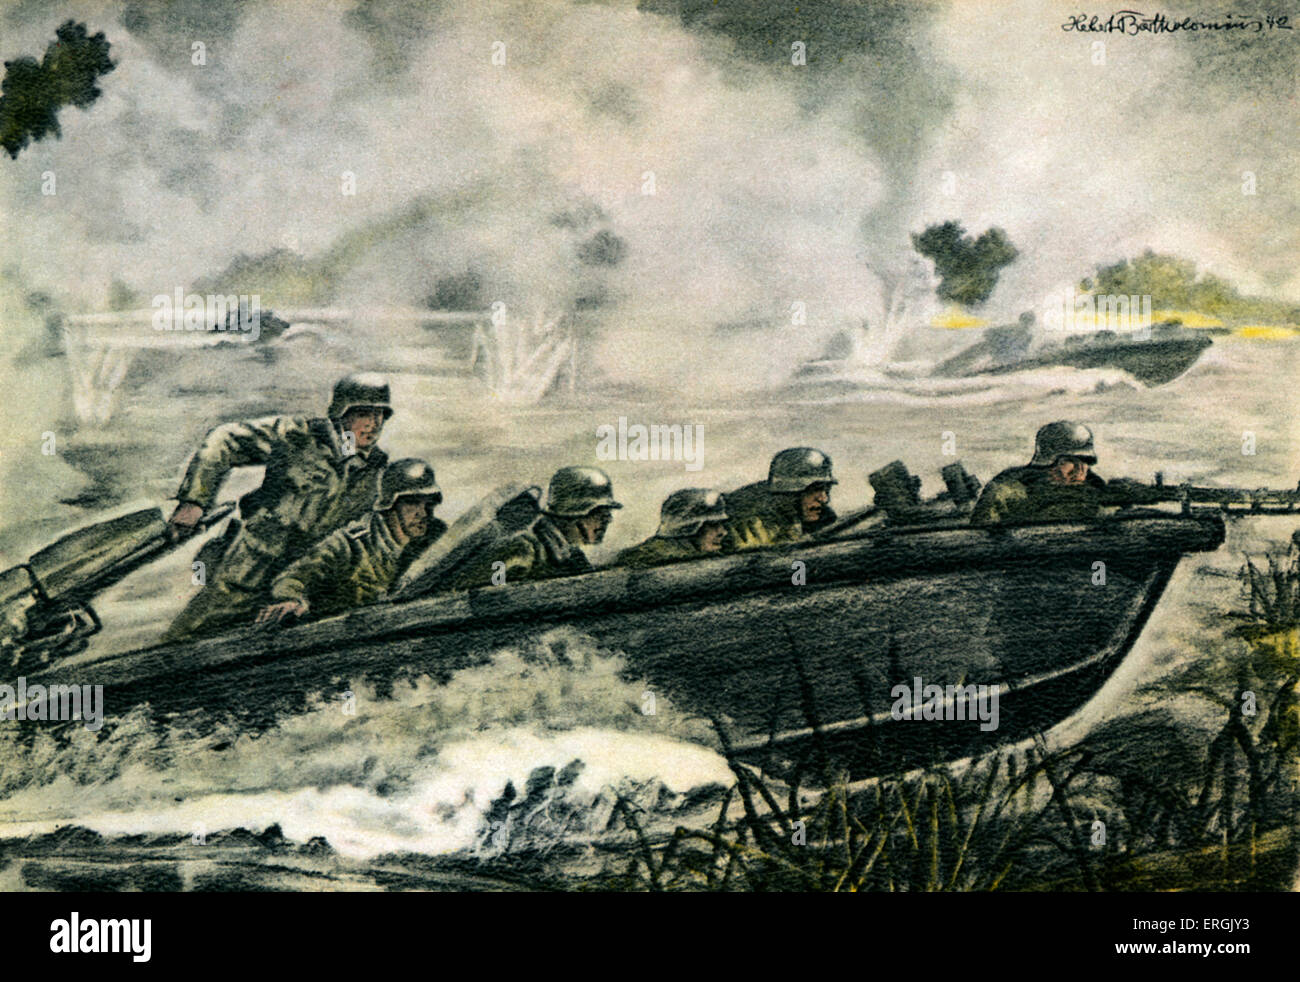 German pioneer troops attacking in an assault boat during World War 2.  After drawing by H. Baartholomäus.  Pioneer soldiers Stock Photo